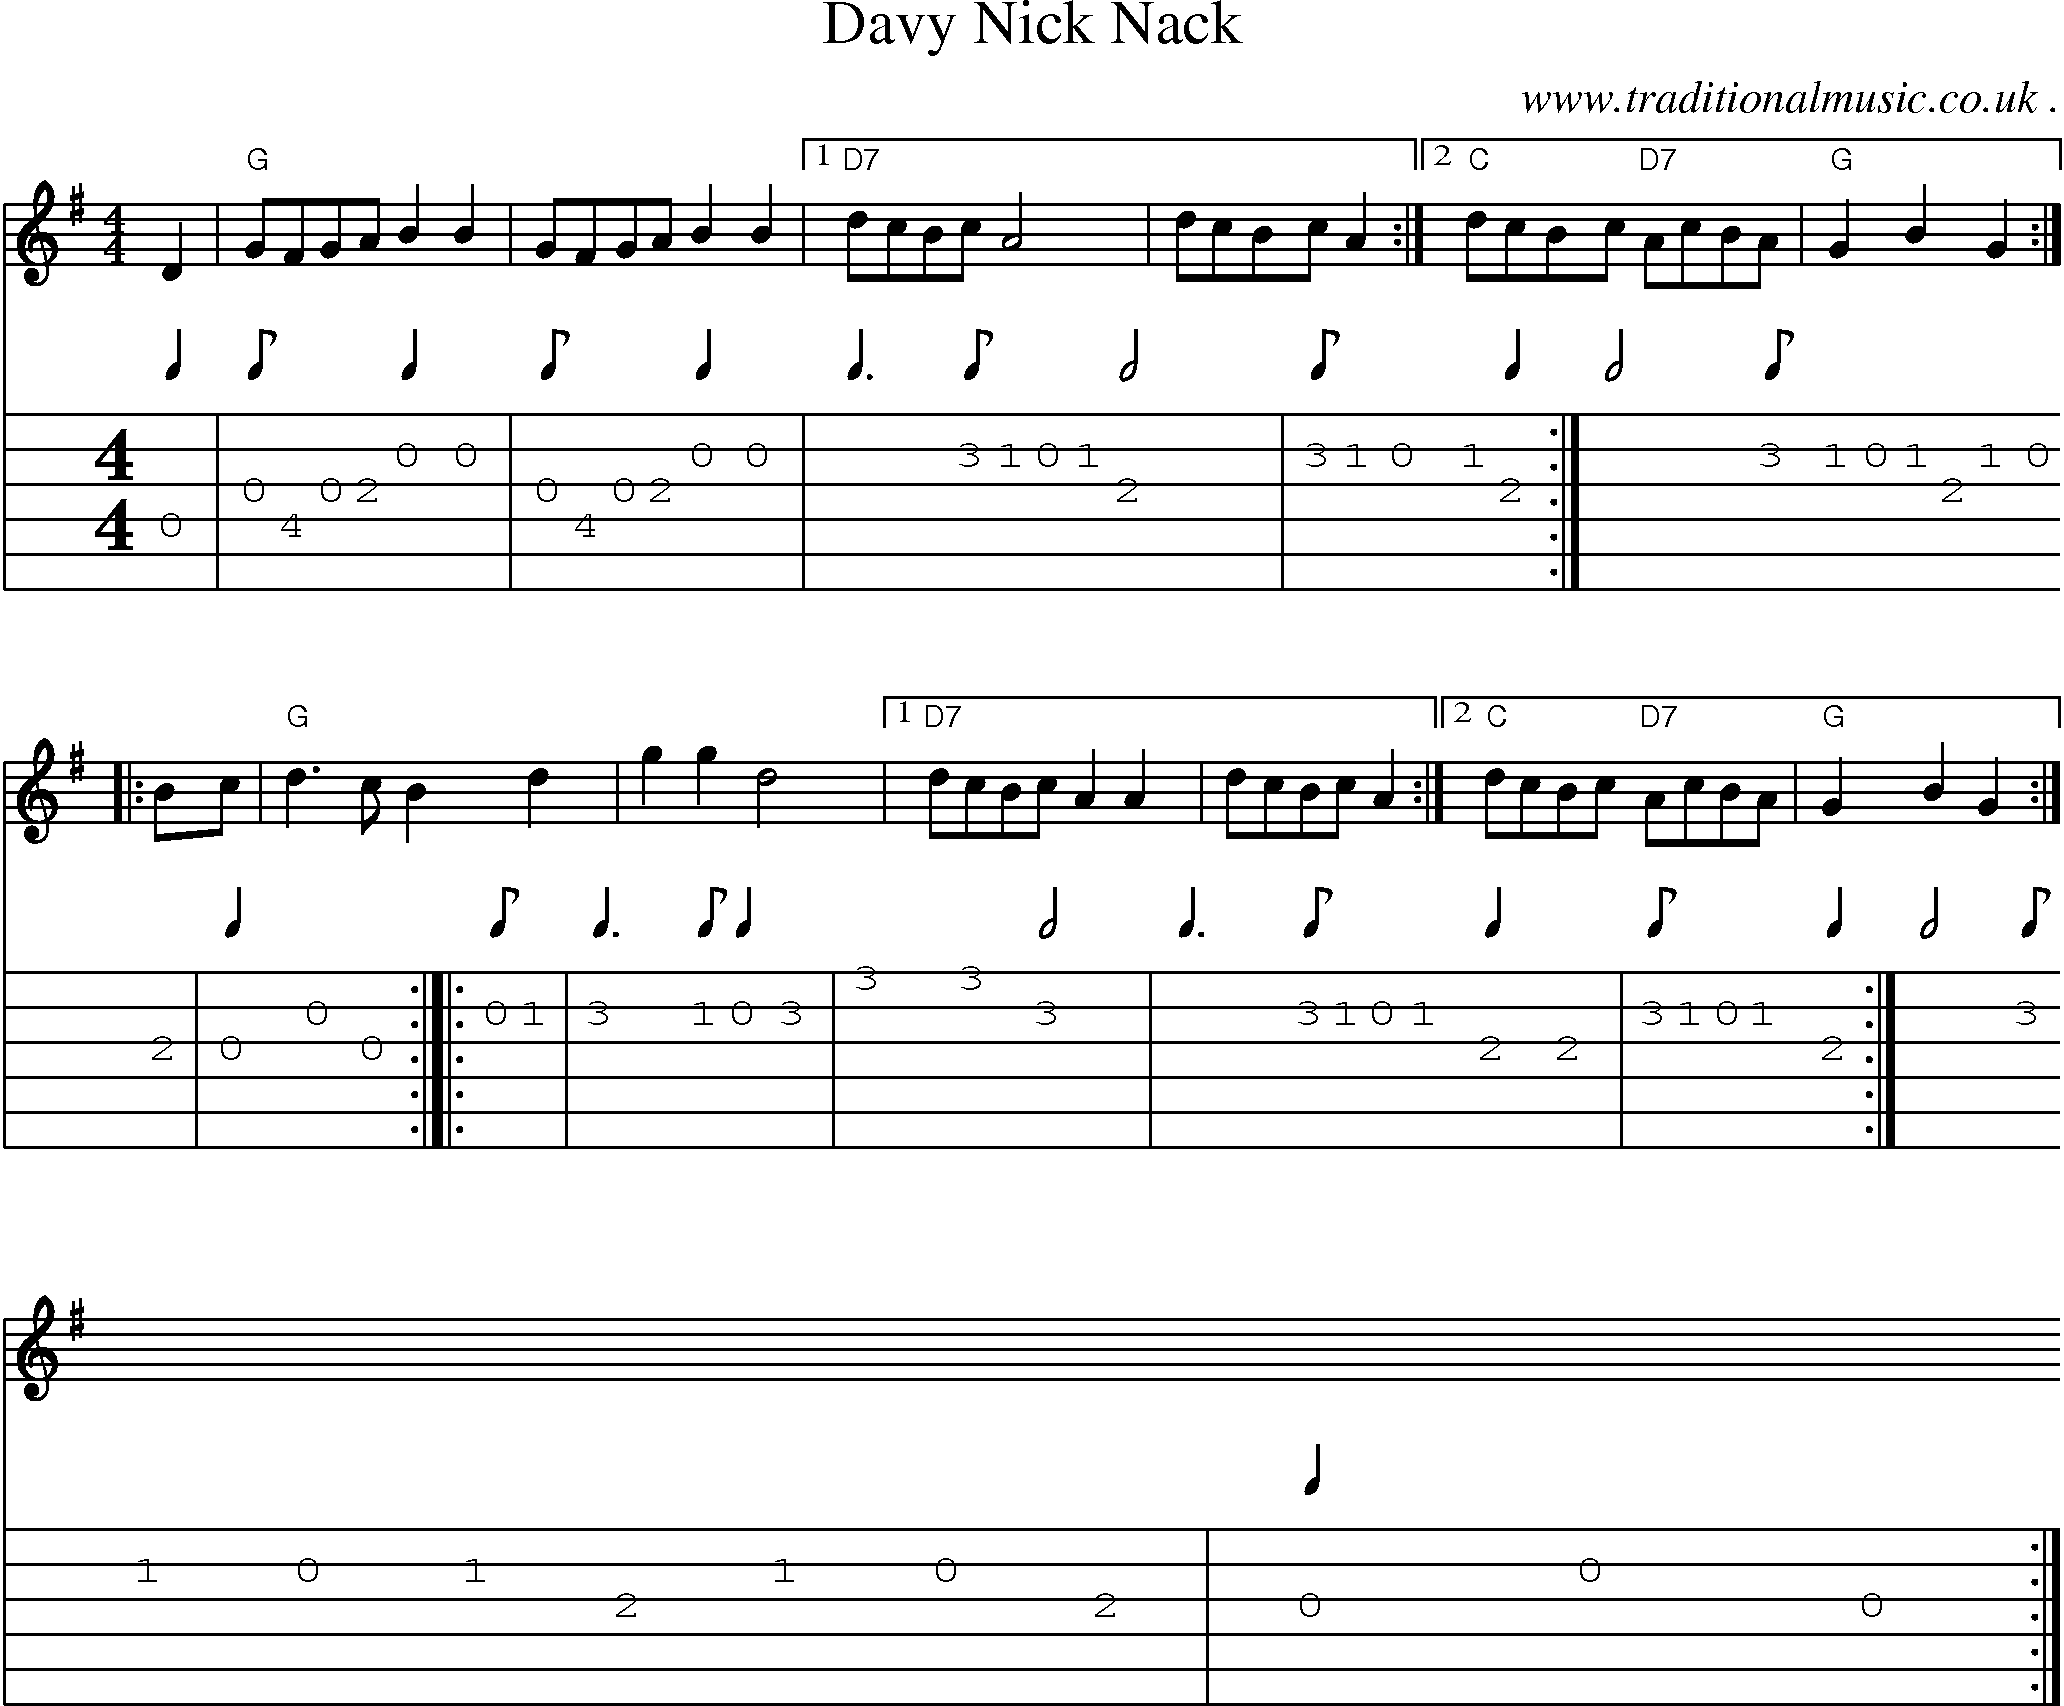 Sheet-music  score, Chords and Guitar Tabs for Davy Nick Nack